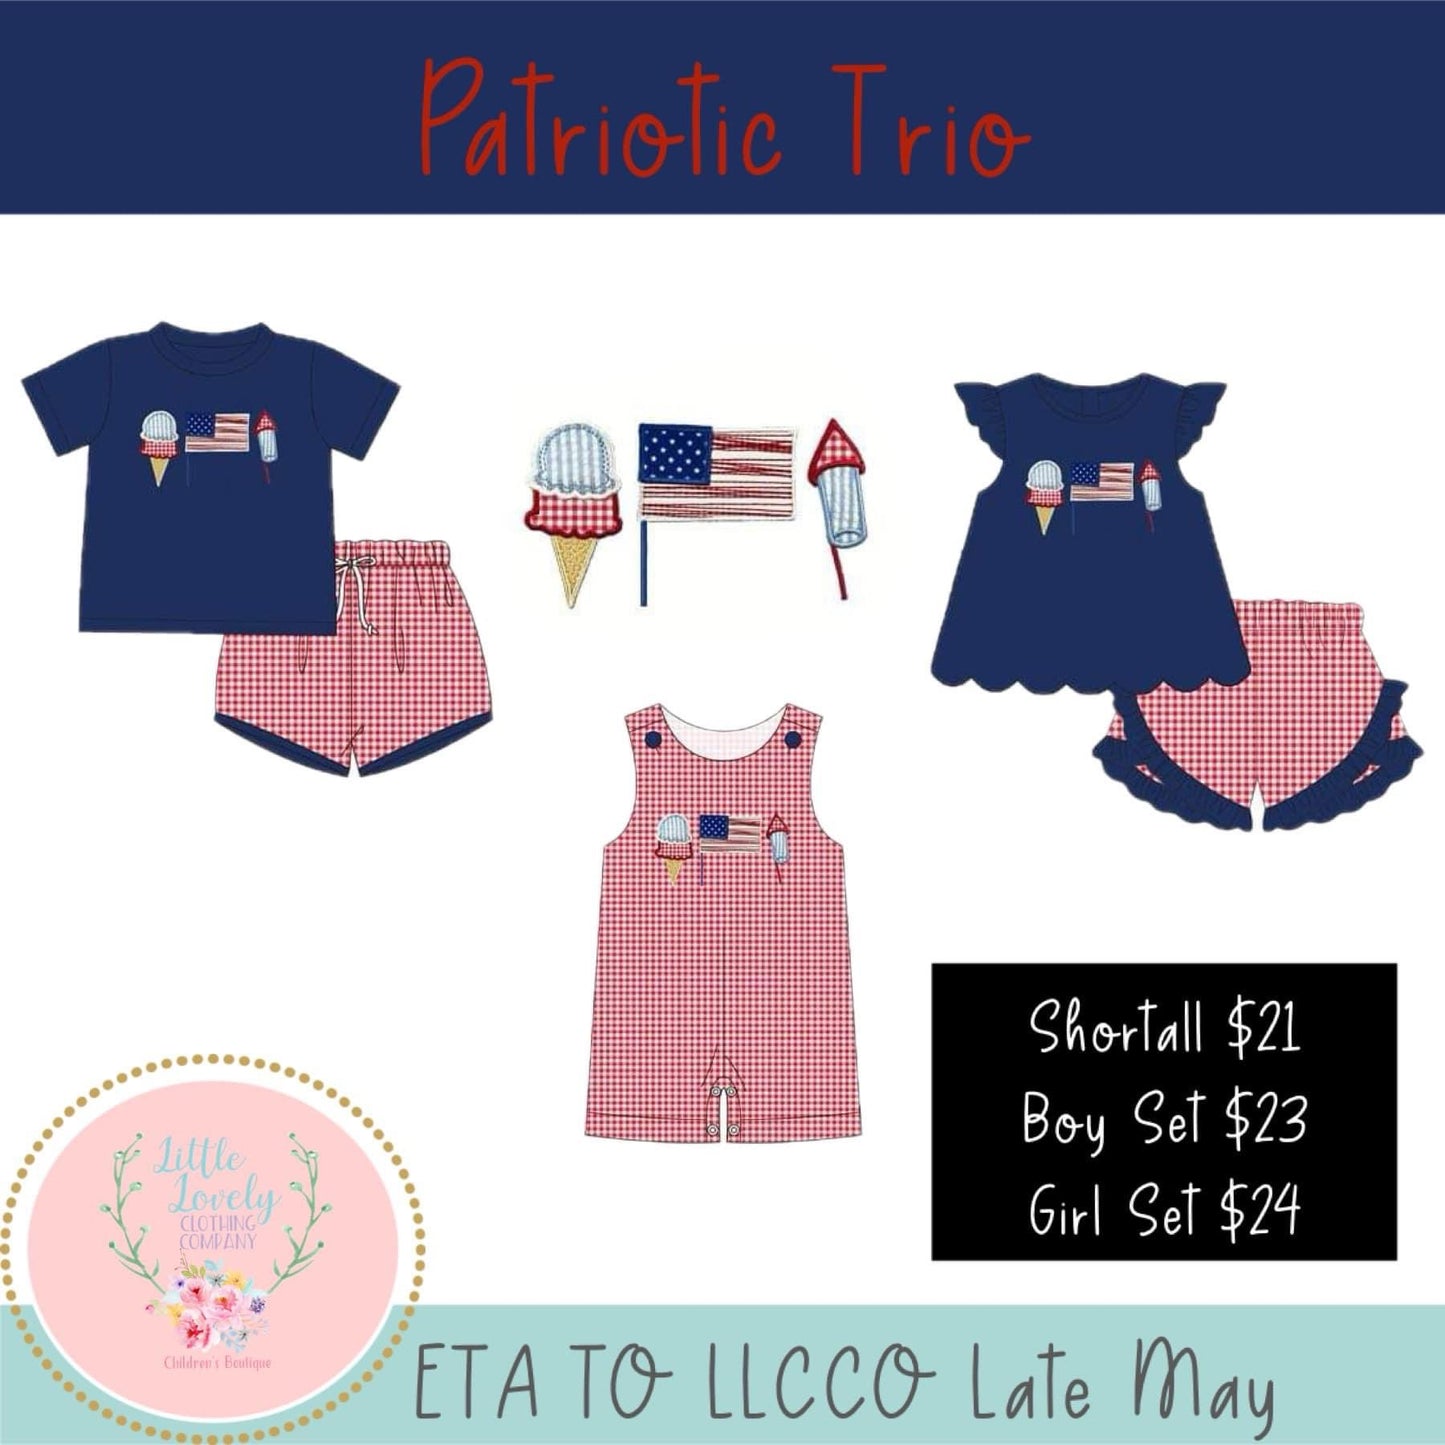 Patriotic Trio Collection, Presale ETA: Late May to LLCCO, then to customers